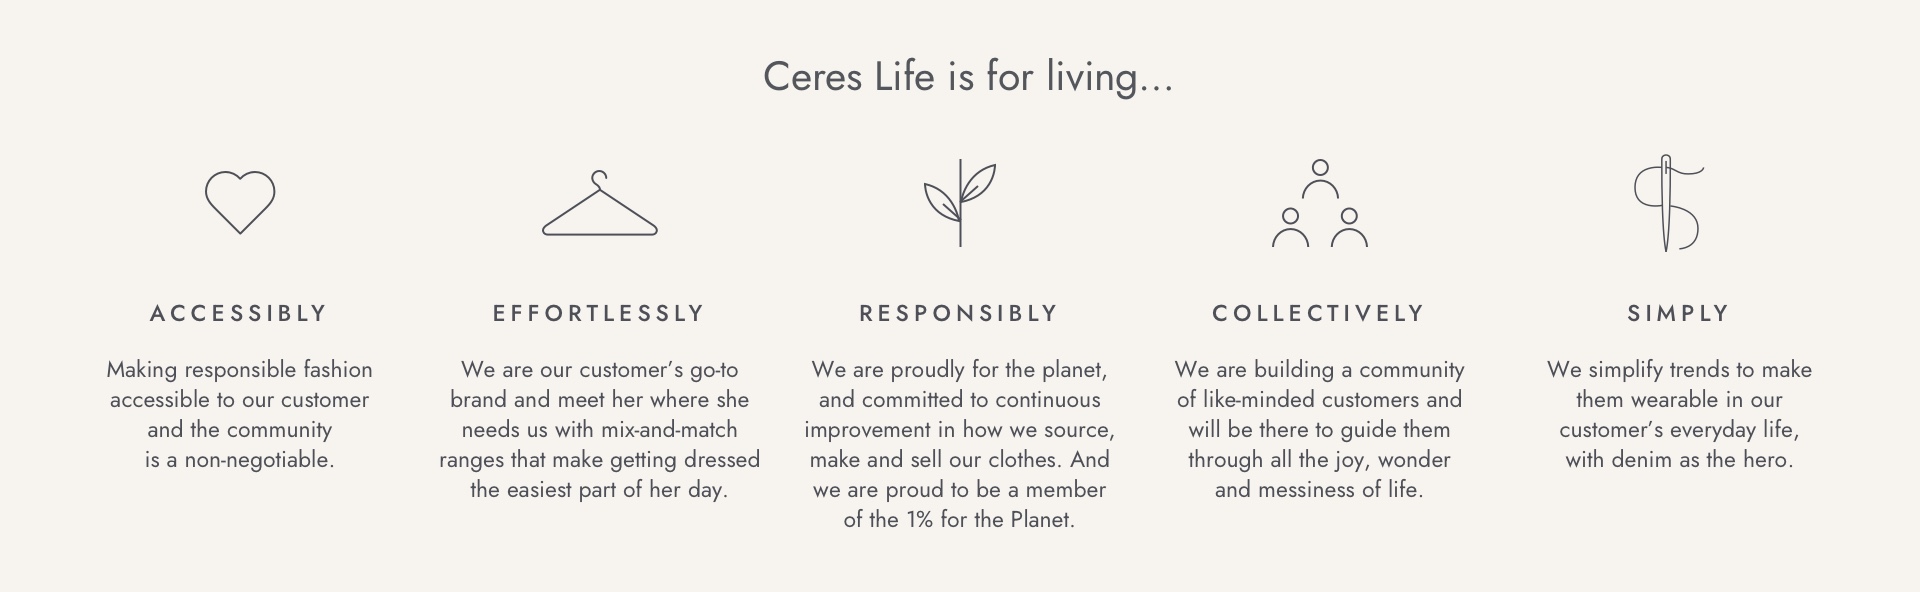 Ceres Life is for living...